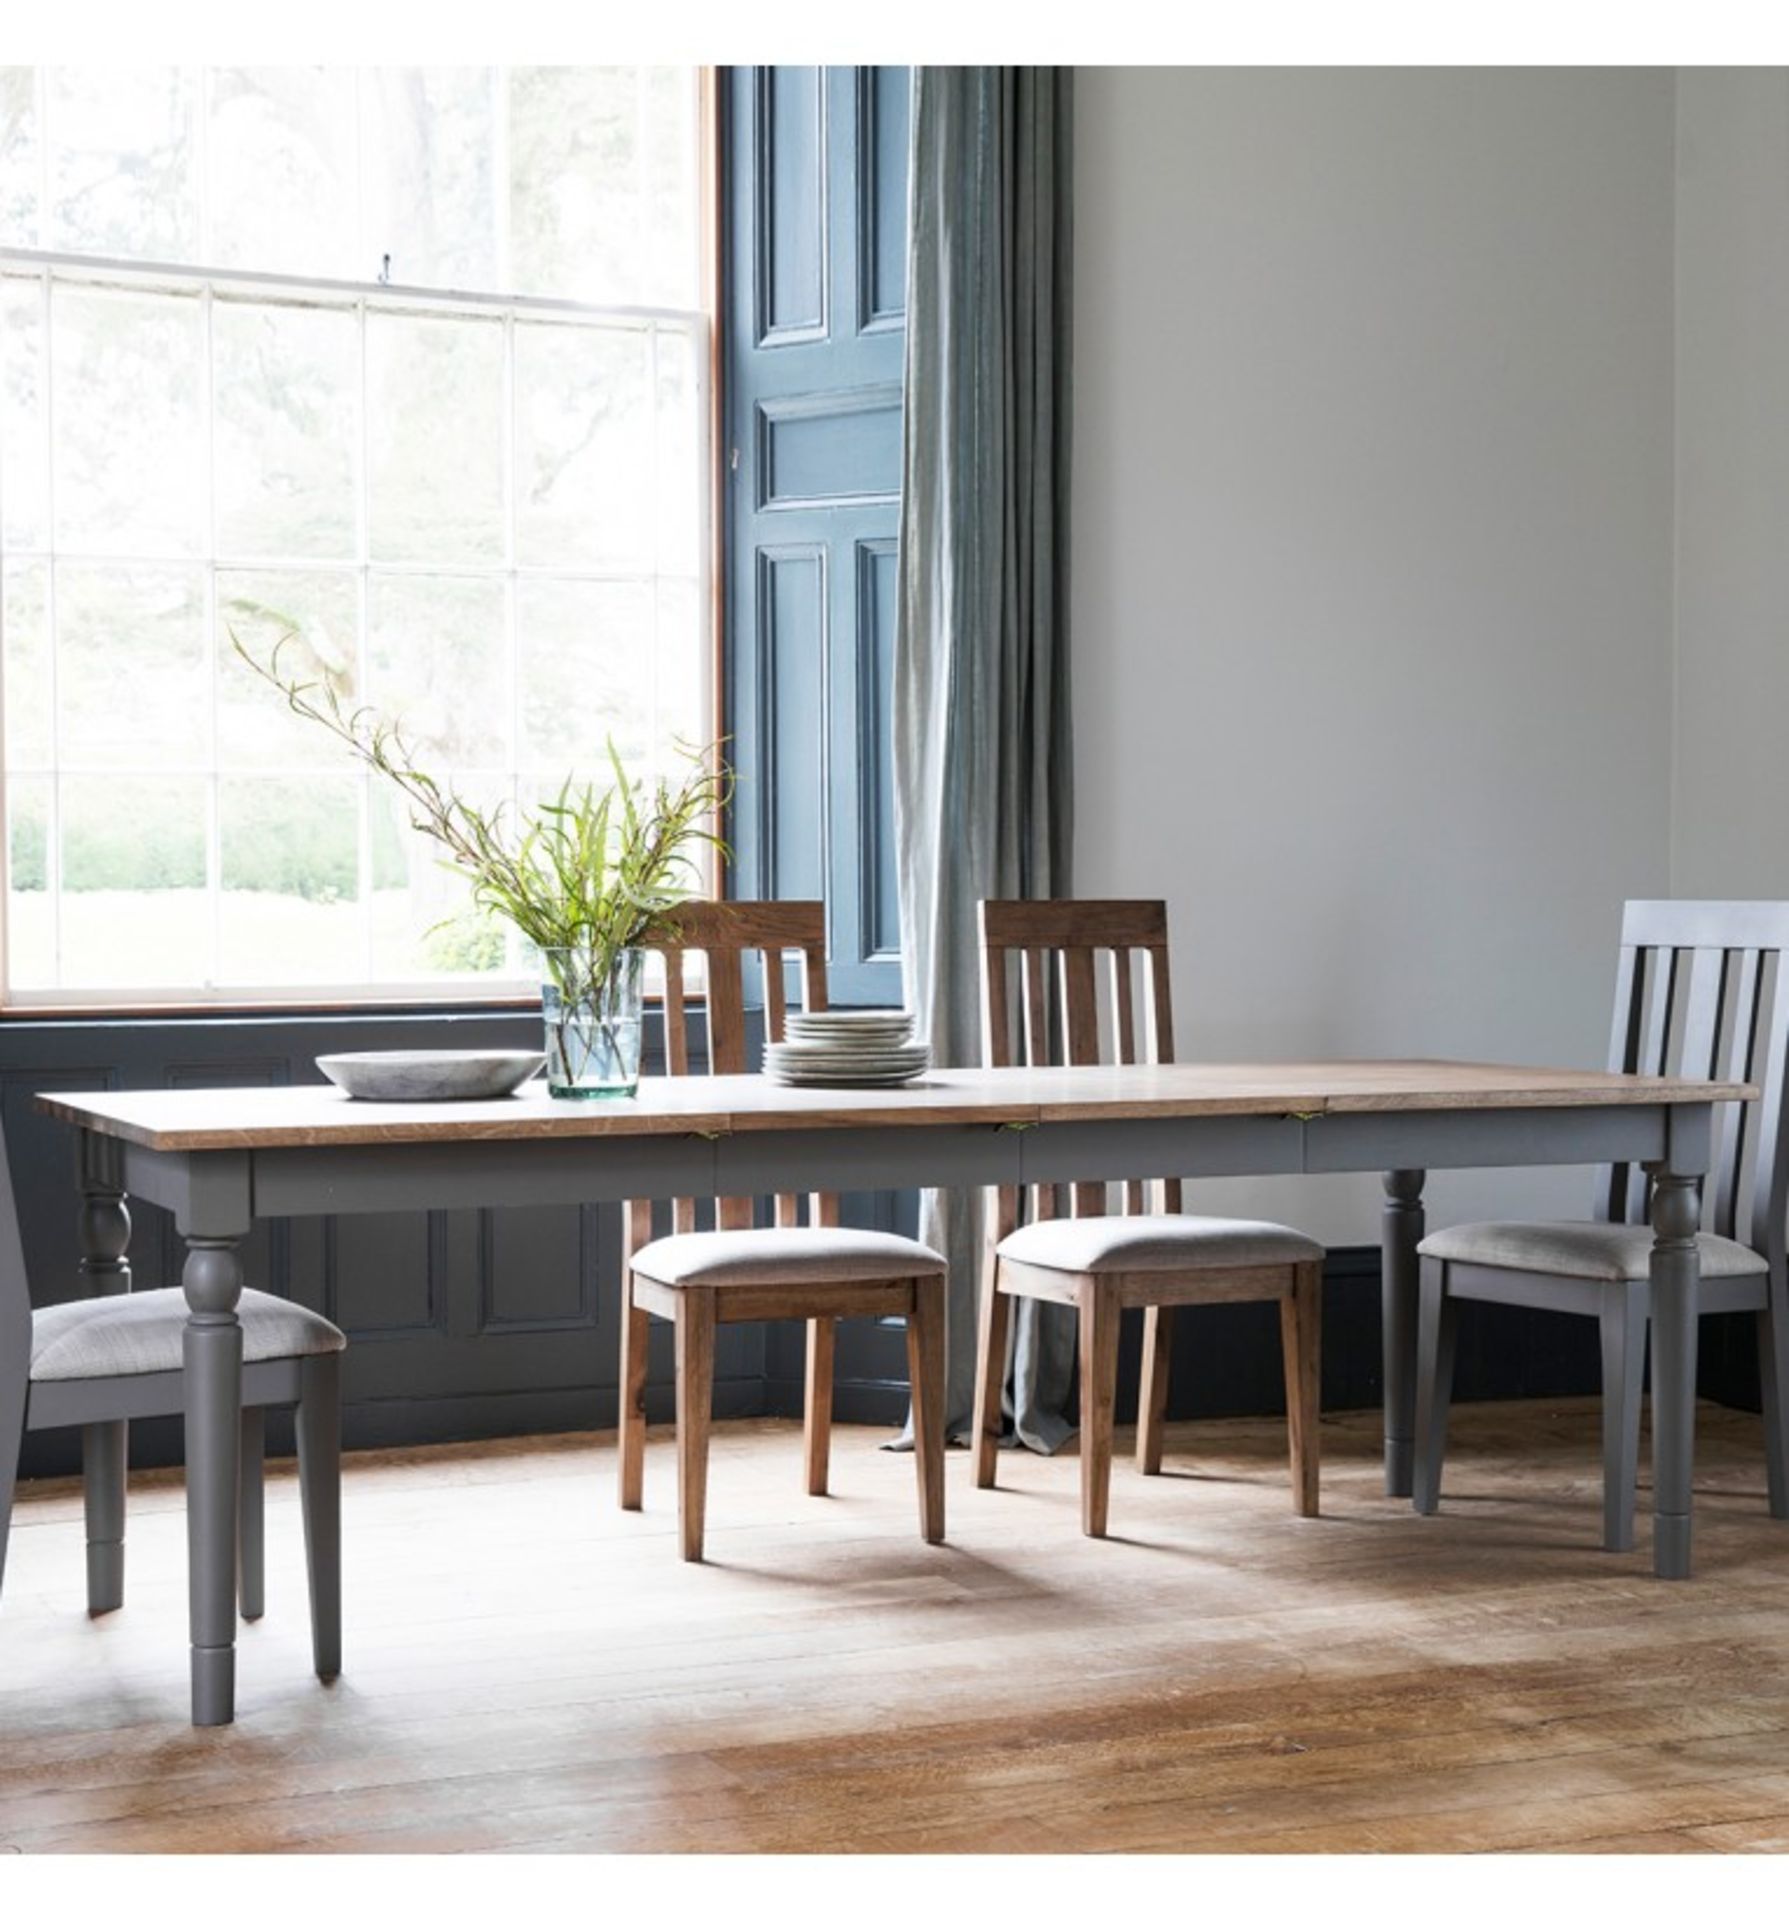 Cookham Extending Dining Table Grey A 2 leaf table extending to 2400mm seating up to 10 people - Image 2 of 2